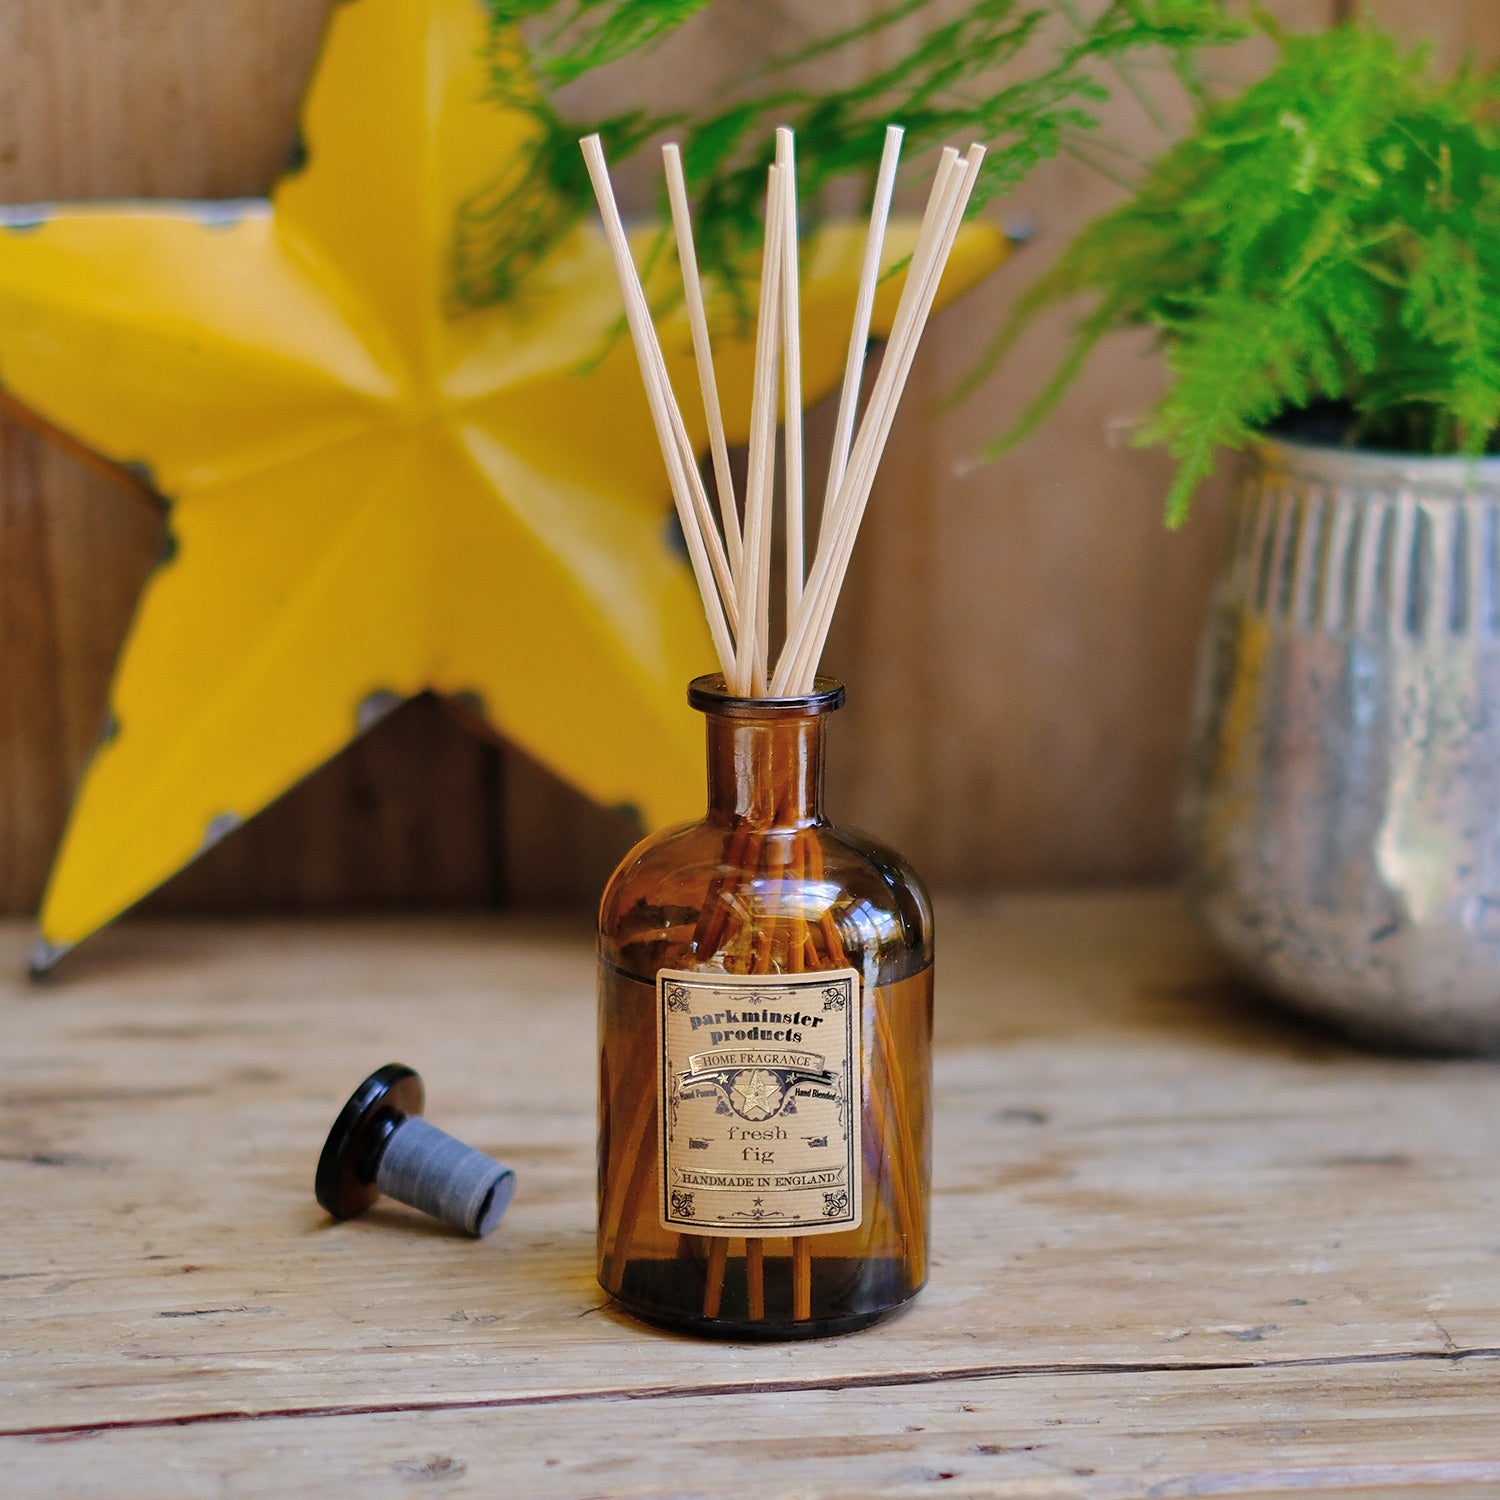 Discover Parkminster's best-selling Fresh Fig Reed Diffuser, 200ml fragrance also offered as a room spray, part of the Apothecary Collection, made in Cornwall